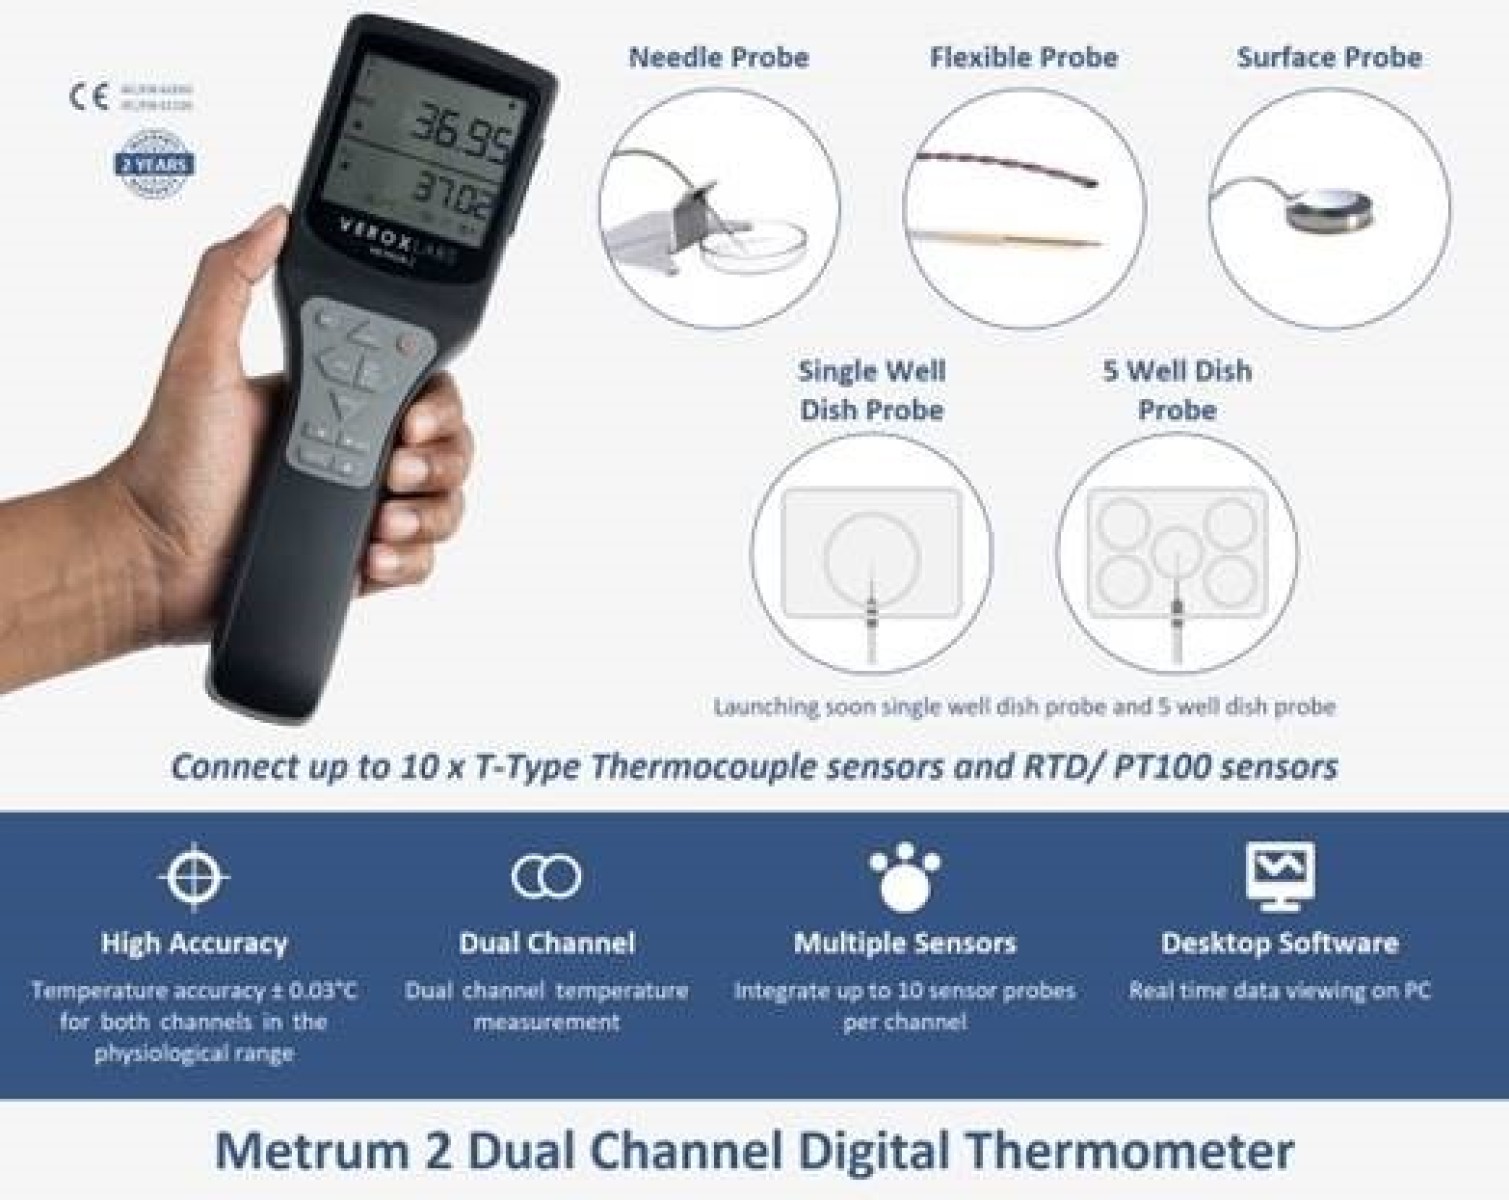 Metrum 2 Dual Channel Digital Thermometer